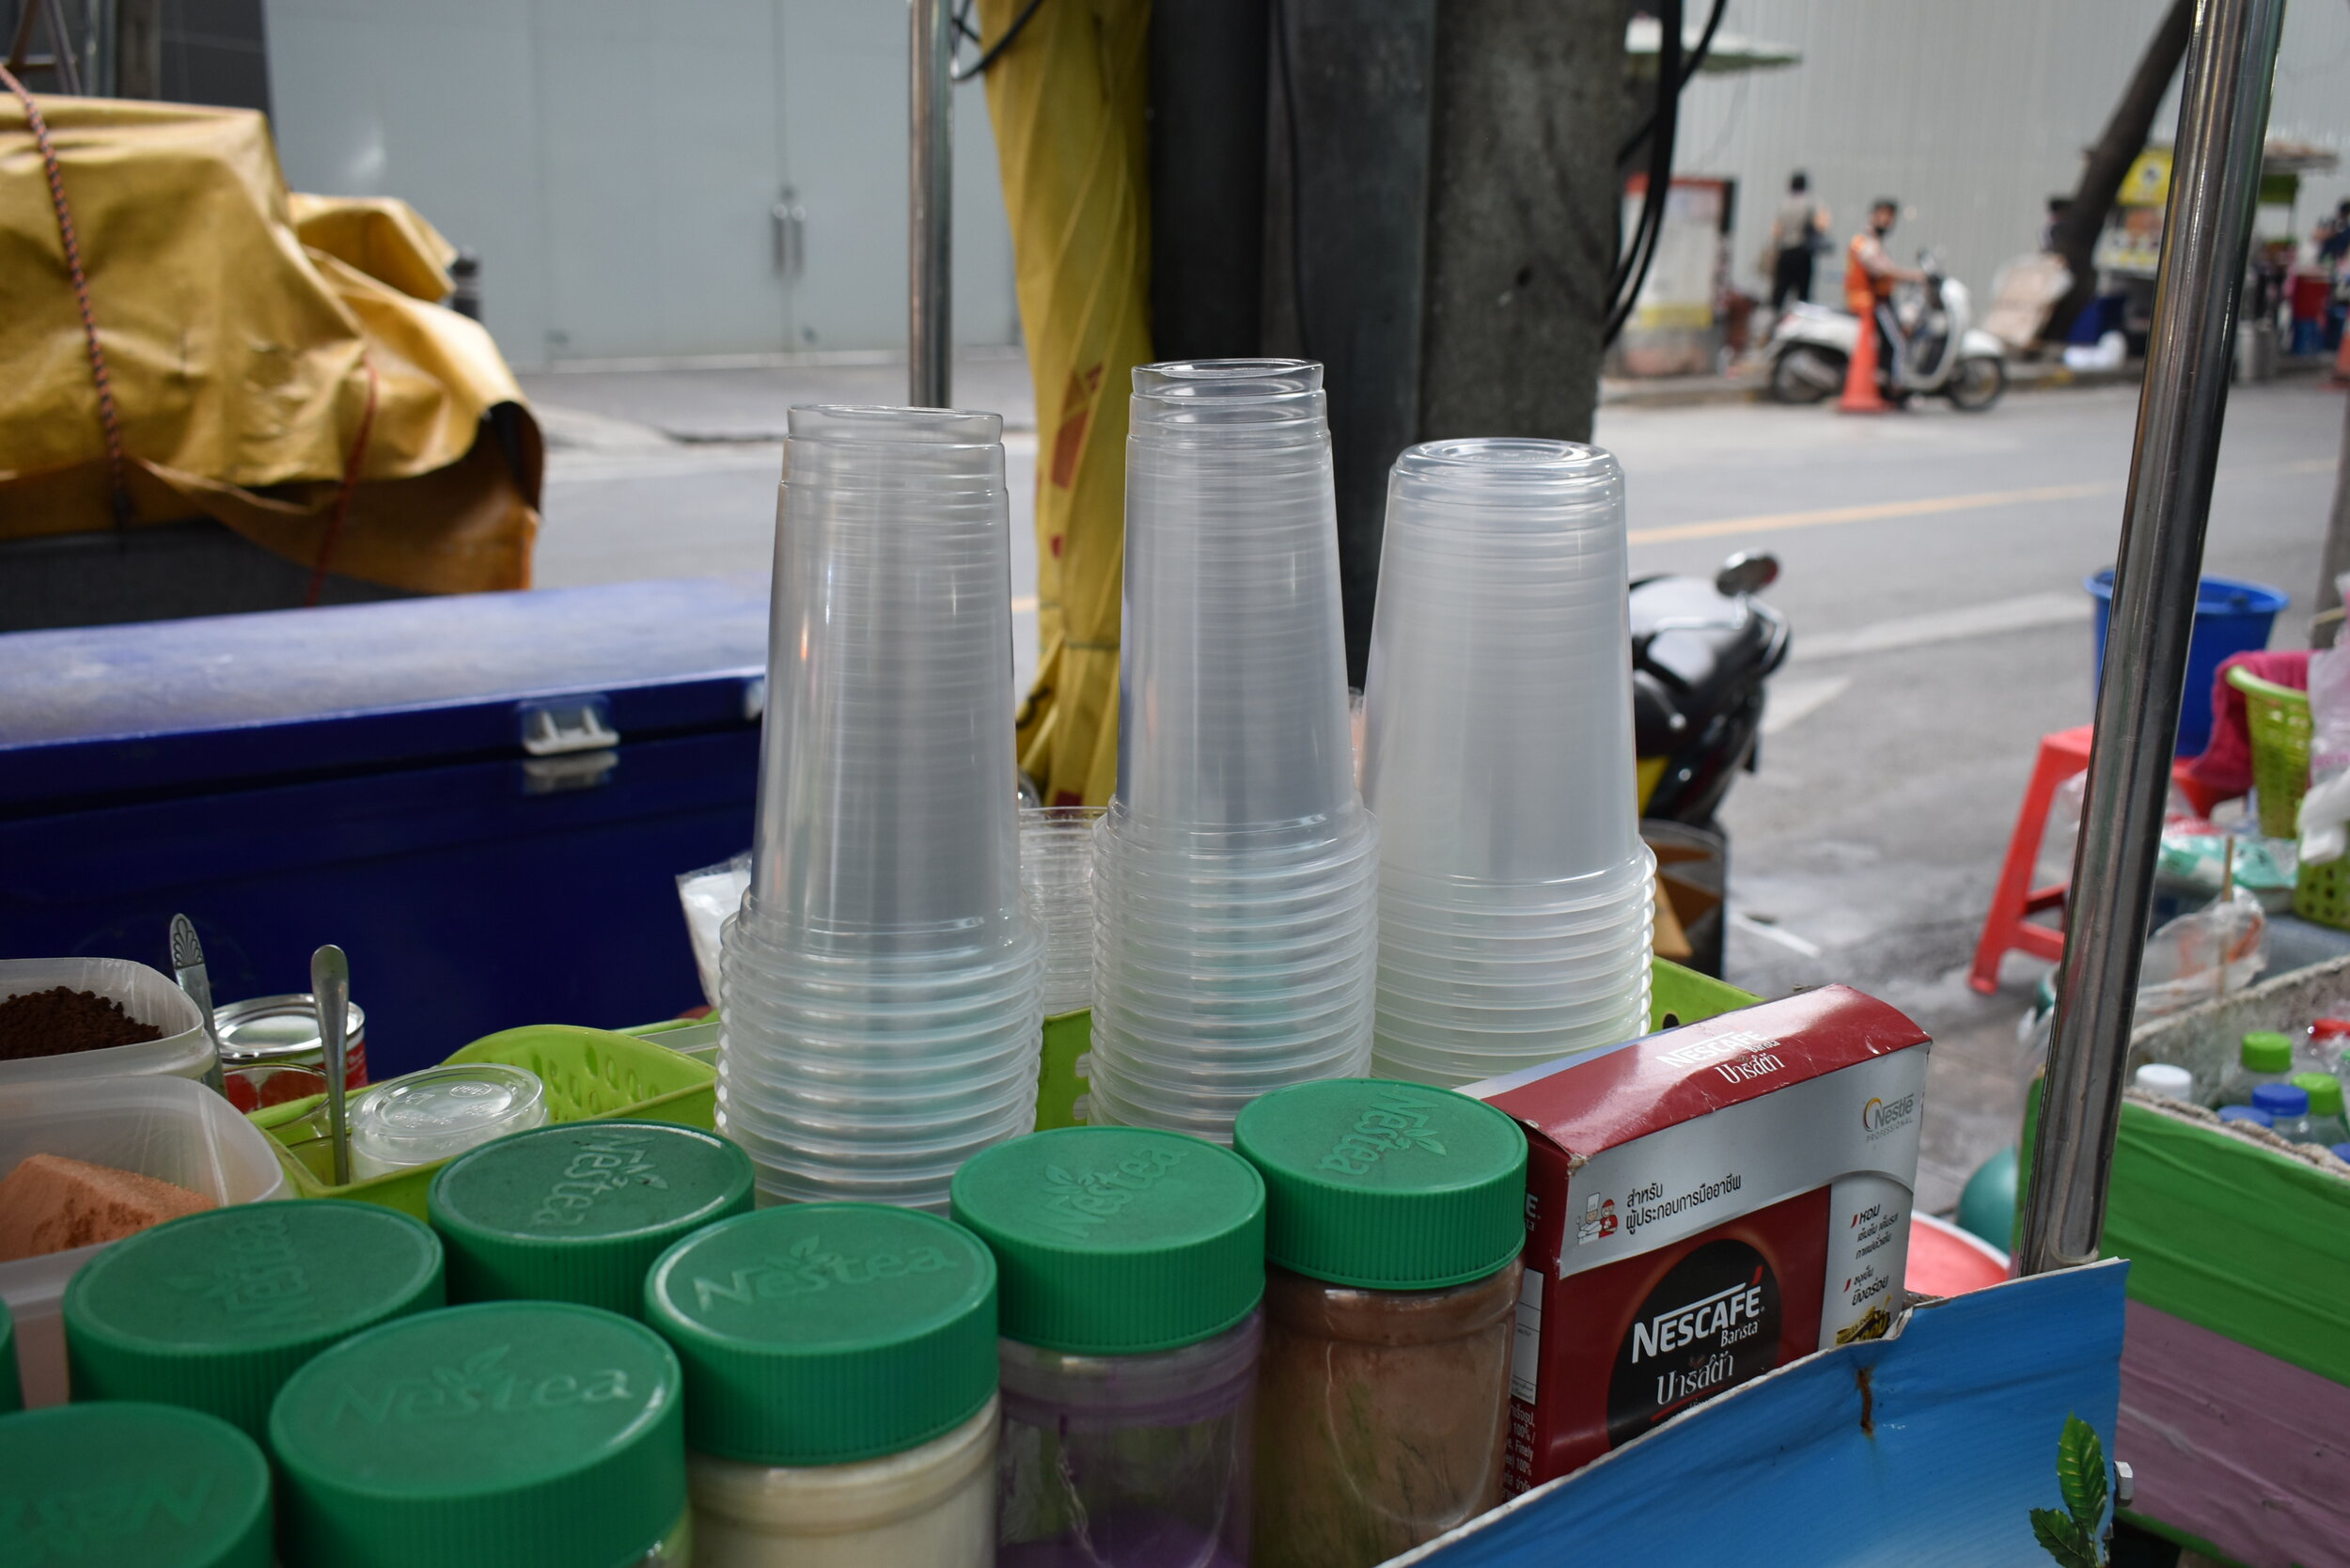 Stacks of food containers8.JPG